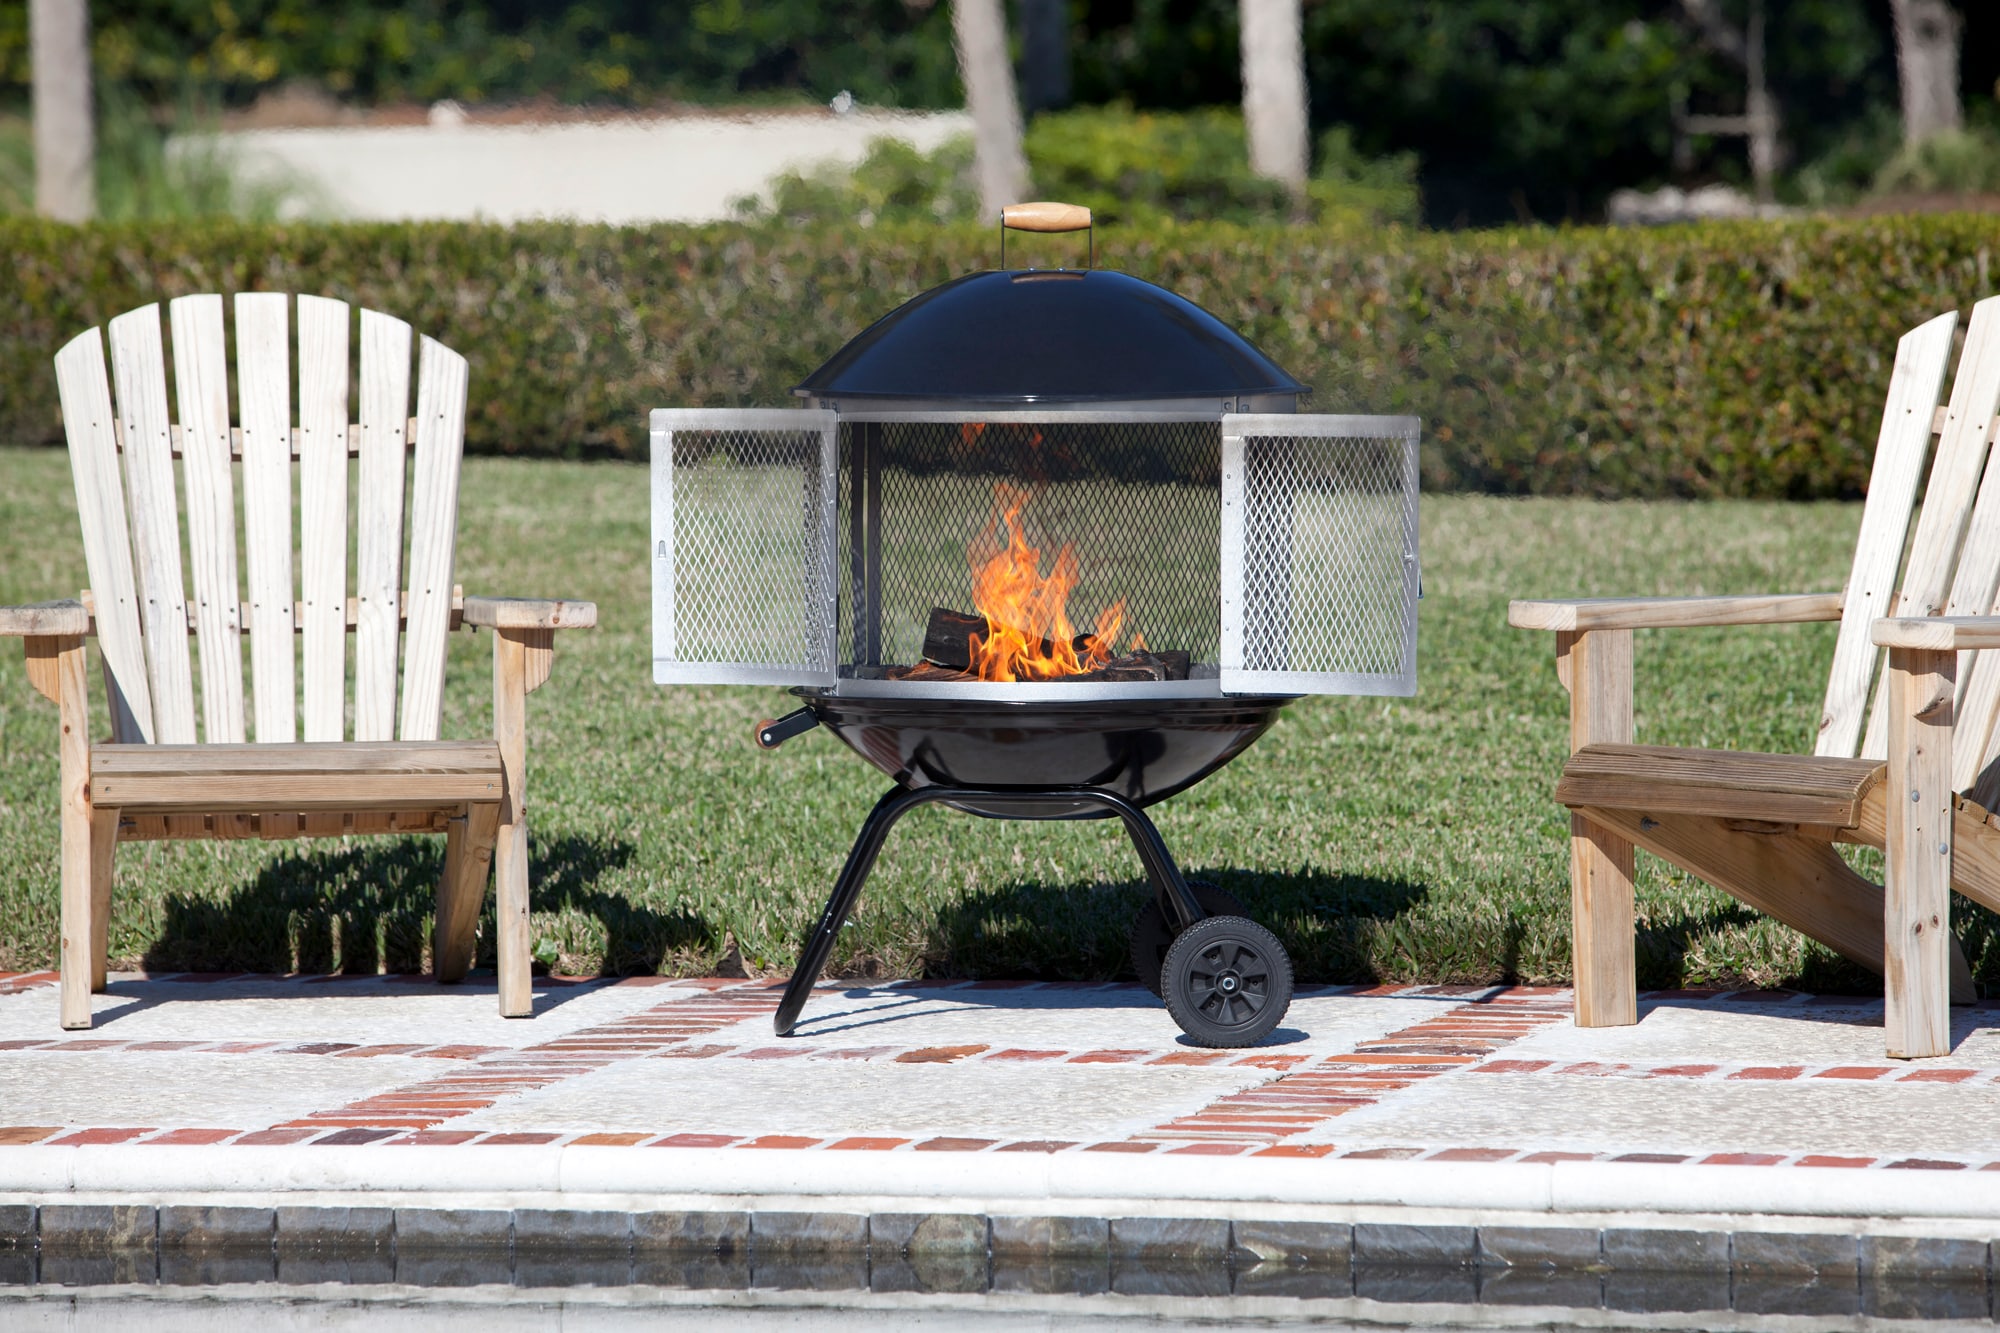 Details about   NEW 28" Outdoor Patio Mobile Portable Round Steel Wood Fire Pit Bowl W/ Wheels 